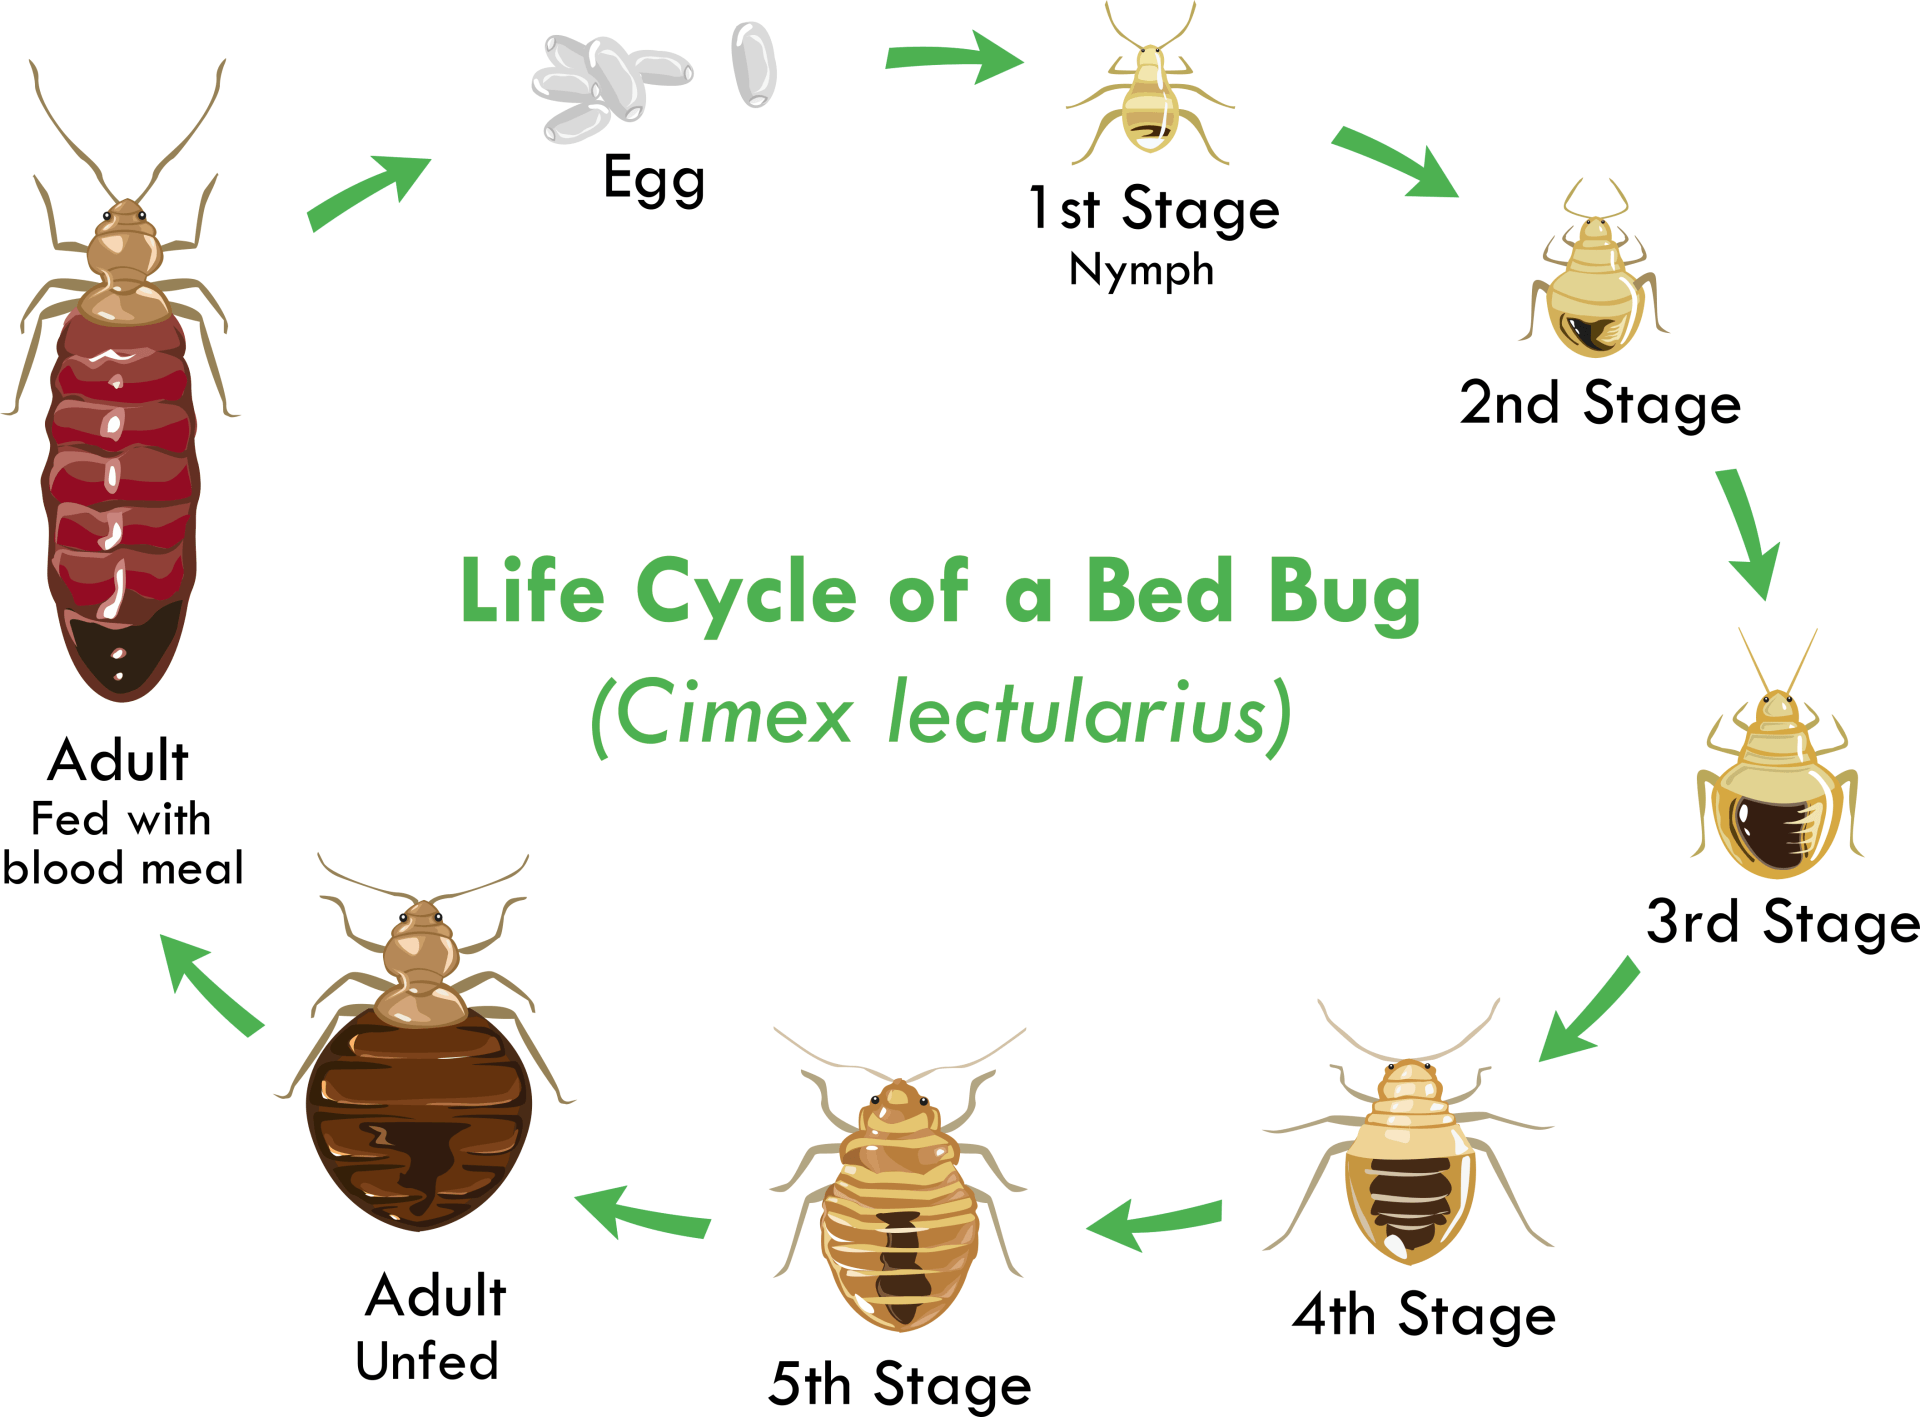 https://lirp.cdn-website.com/e15ed933/dms3rep/multi/opt/bed-bug-life-cycle-640w.png